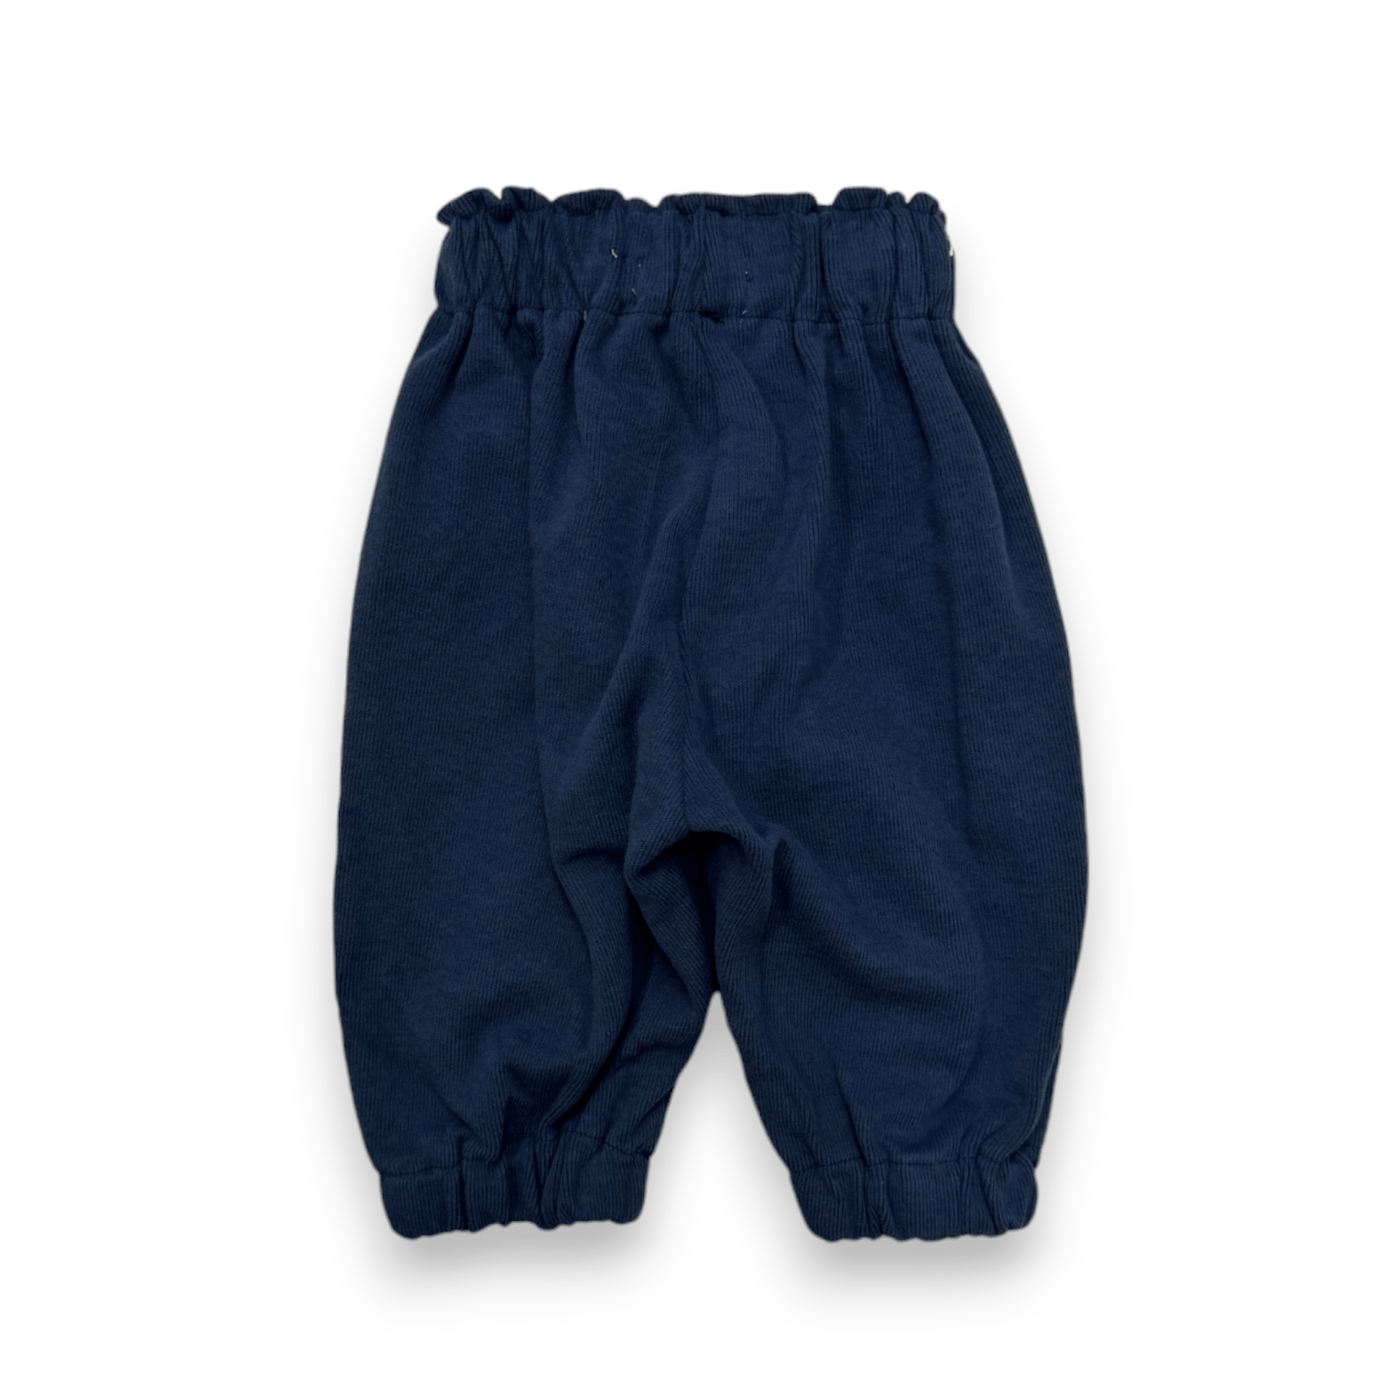 Best Day Ever Kids Baby & Toddler Bottoms The Softest Sweatpant Ever - Navy buy online boutique kids clothing